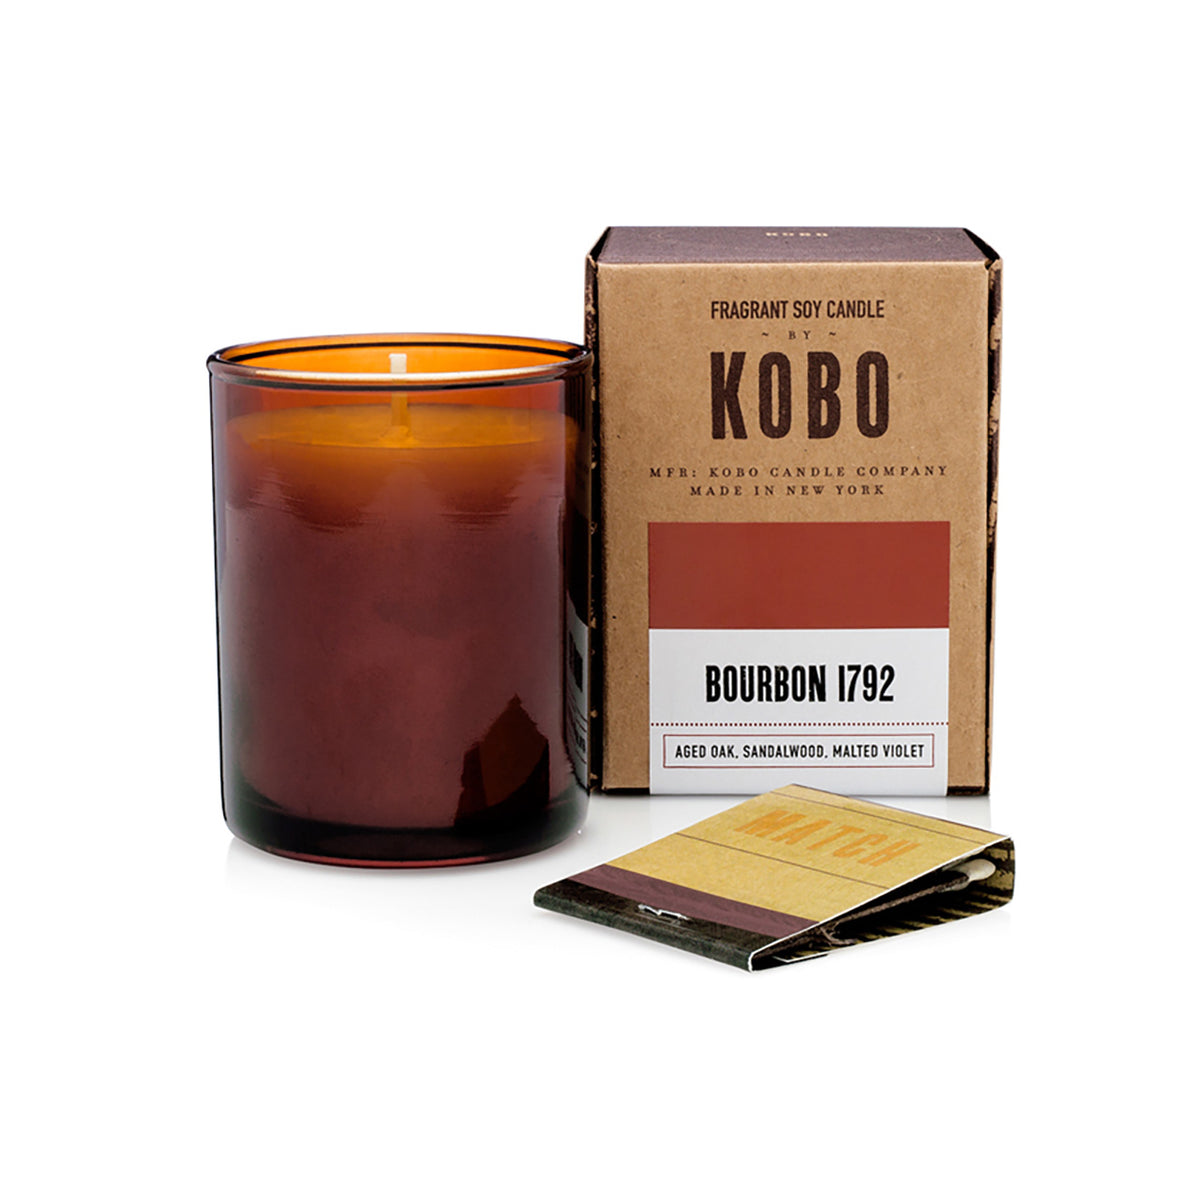 Kobo Pure Soy votive candle in an amber glass jar with ceramic matches and kraft box. Bourbon 1792 scent